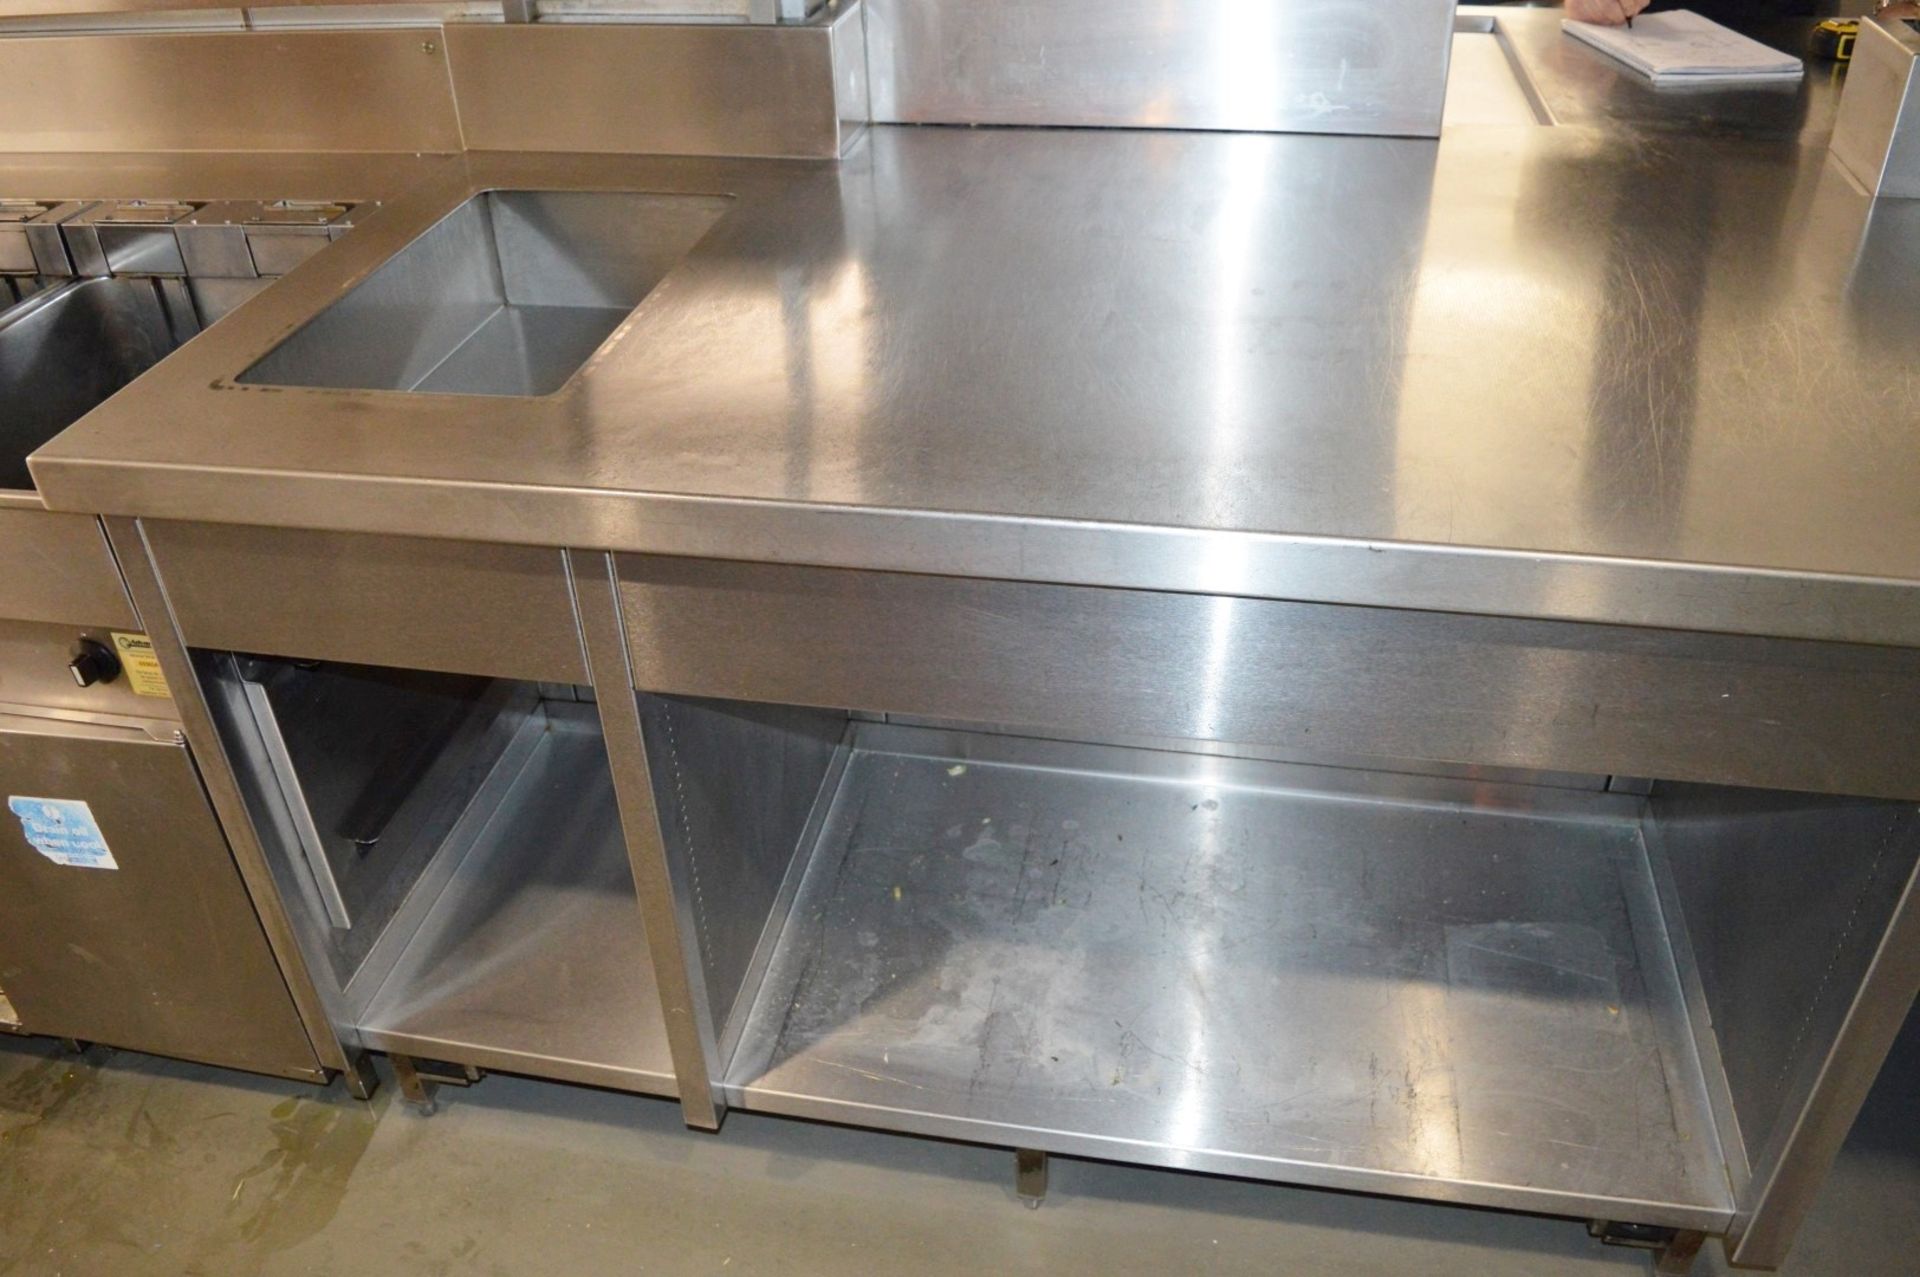 1 x Stainless Steel Centre Kitchen Island - CL245 - Location: London EC4M COLLECTIONS: Buyers will